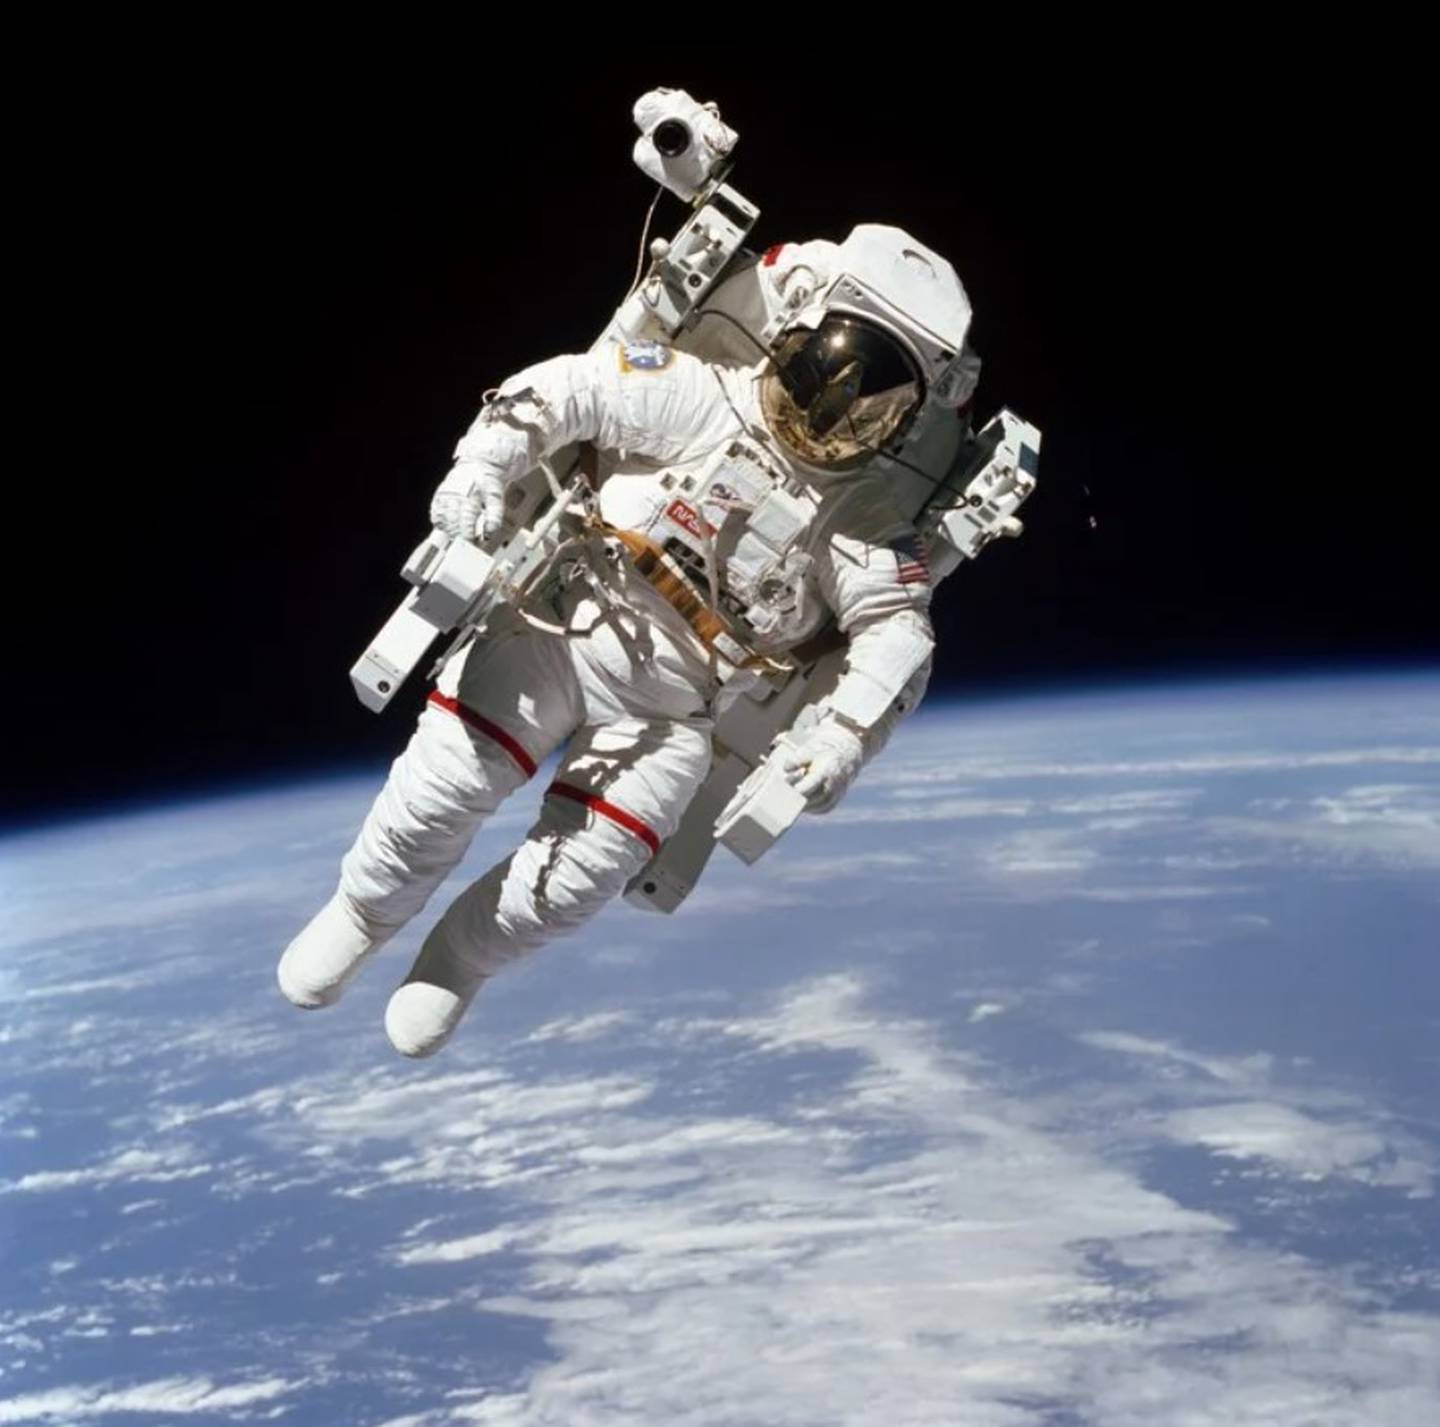 Bruce McCandless II and the most spectacular photo in the history of astronauts, how did he do it?